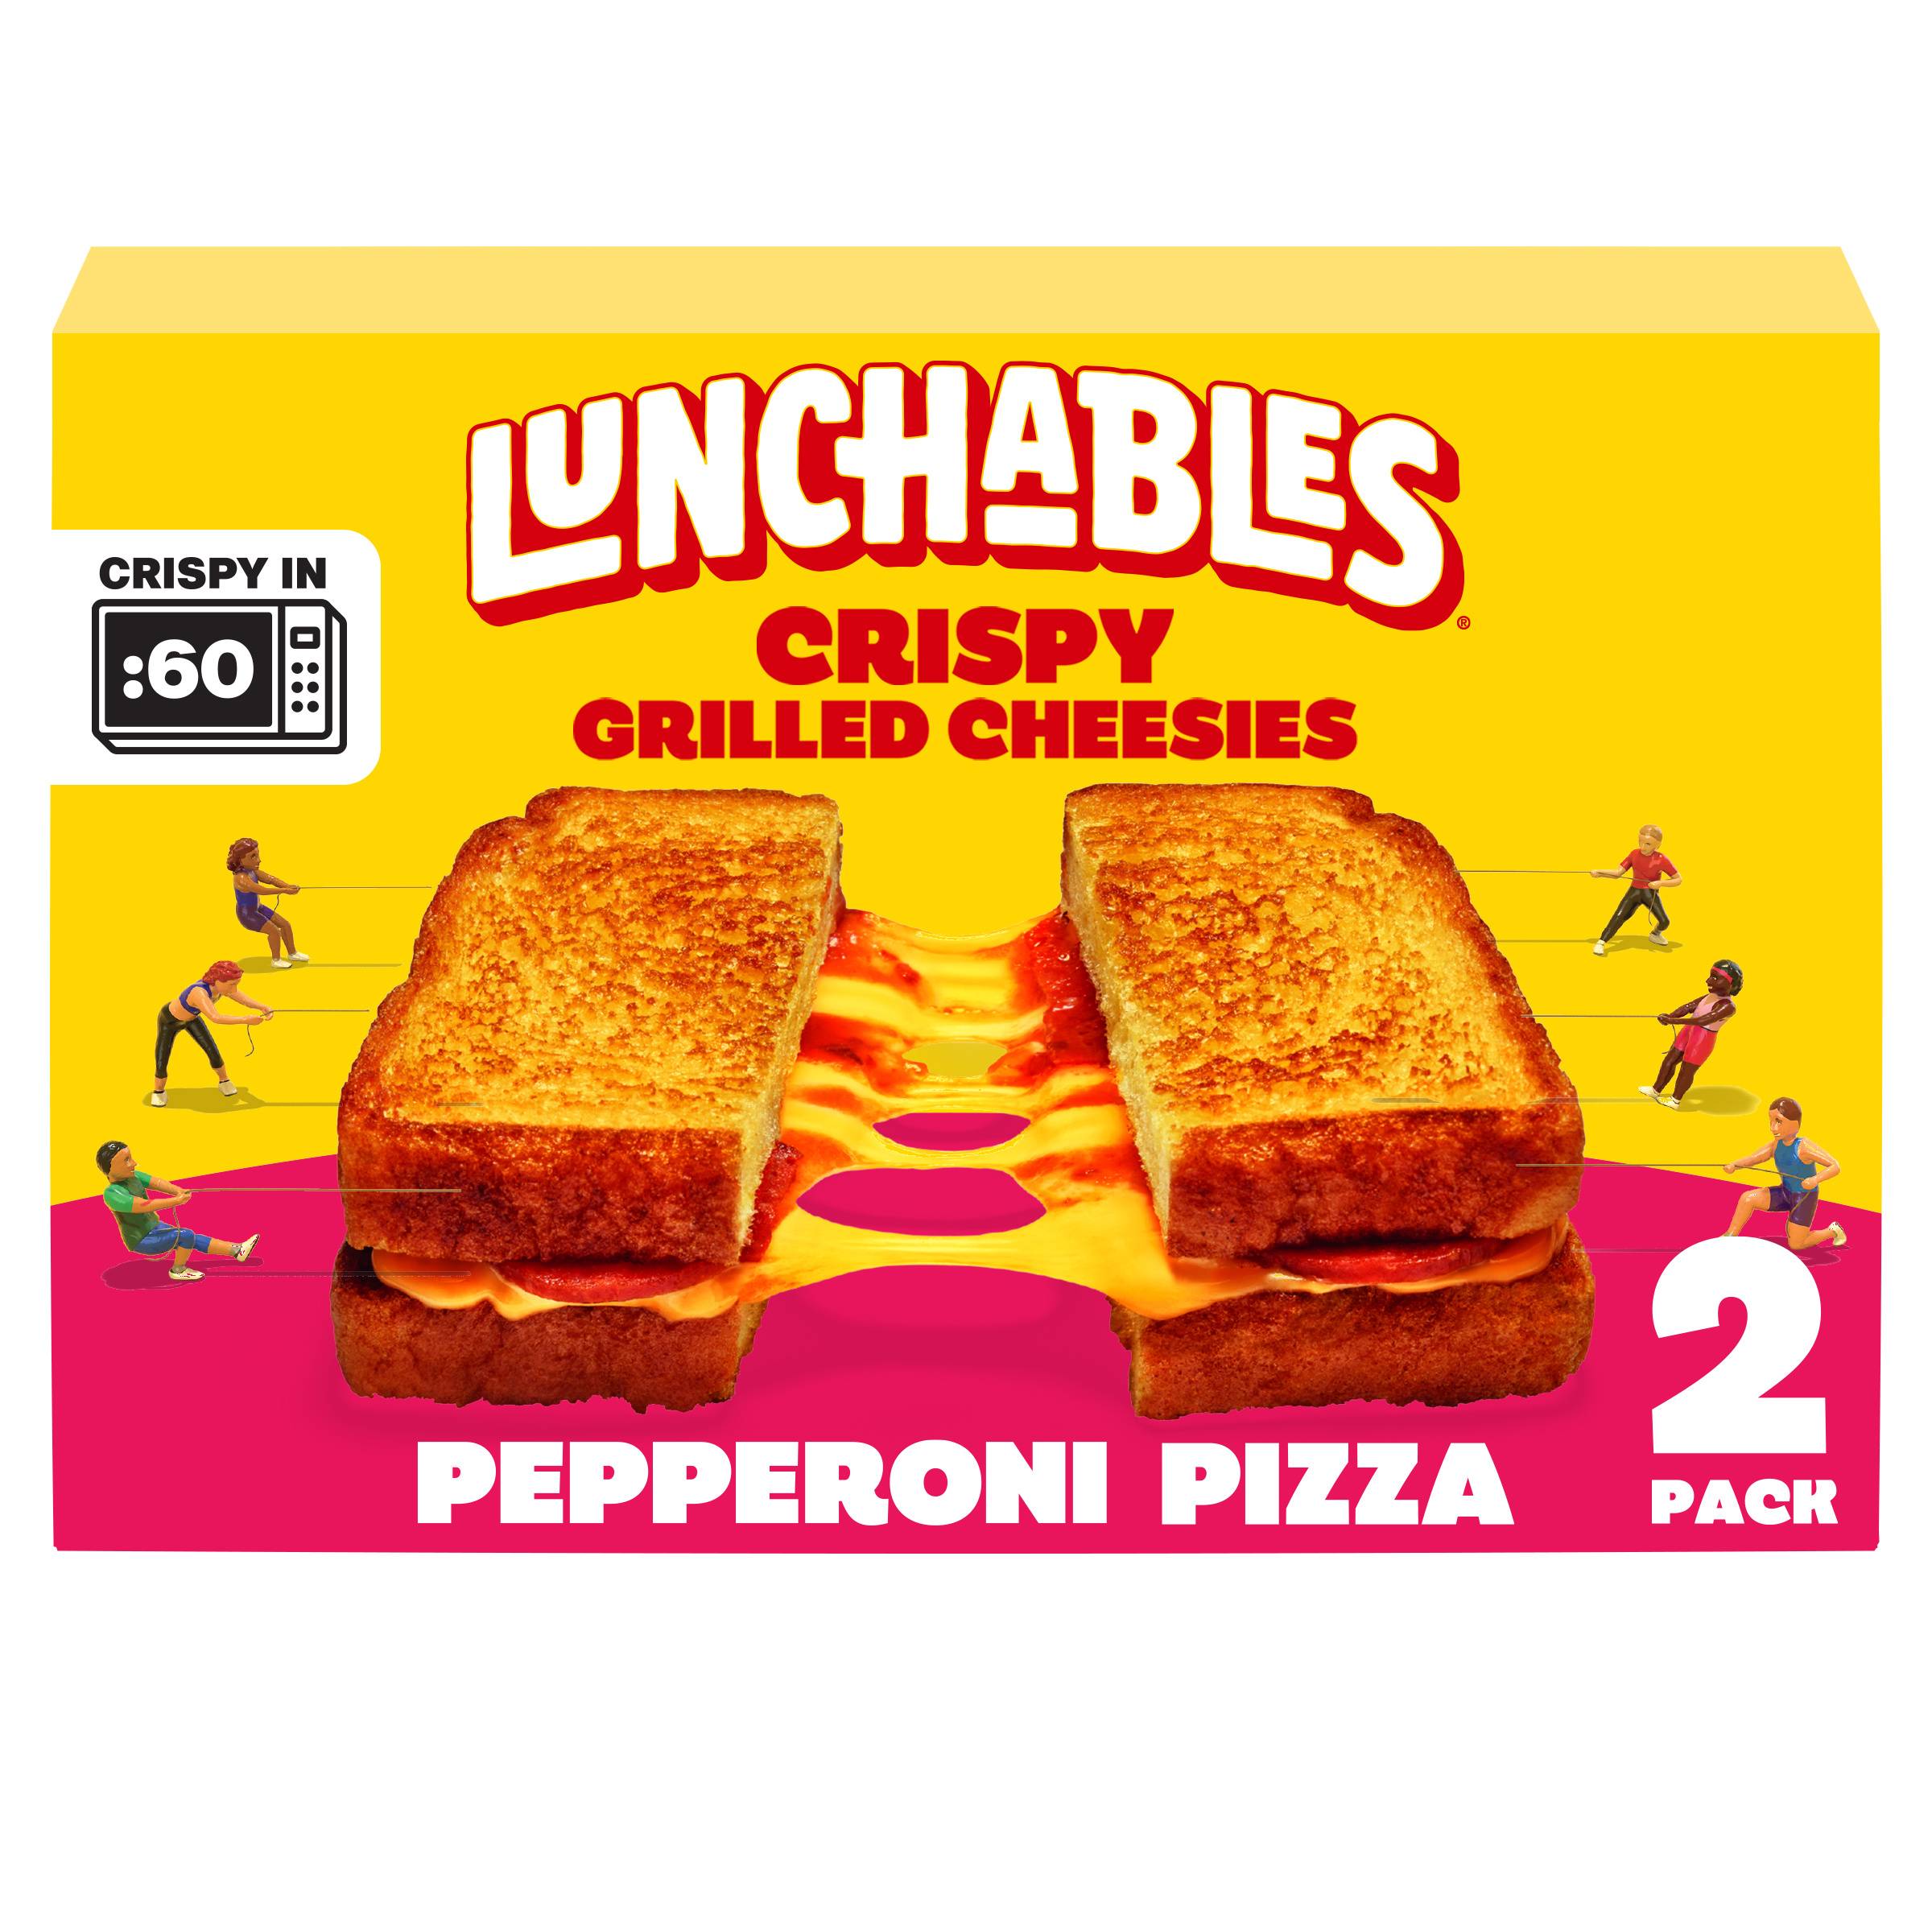 Lunchables Crispy Grilled Cheesies, Pepperoni Pizza Sandwich 2ct